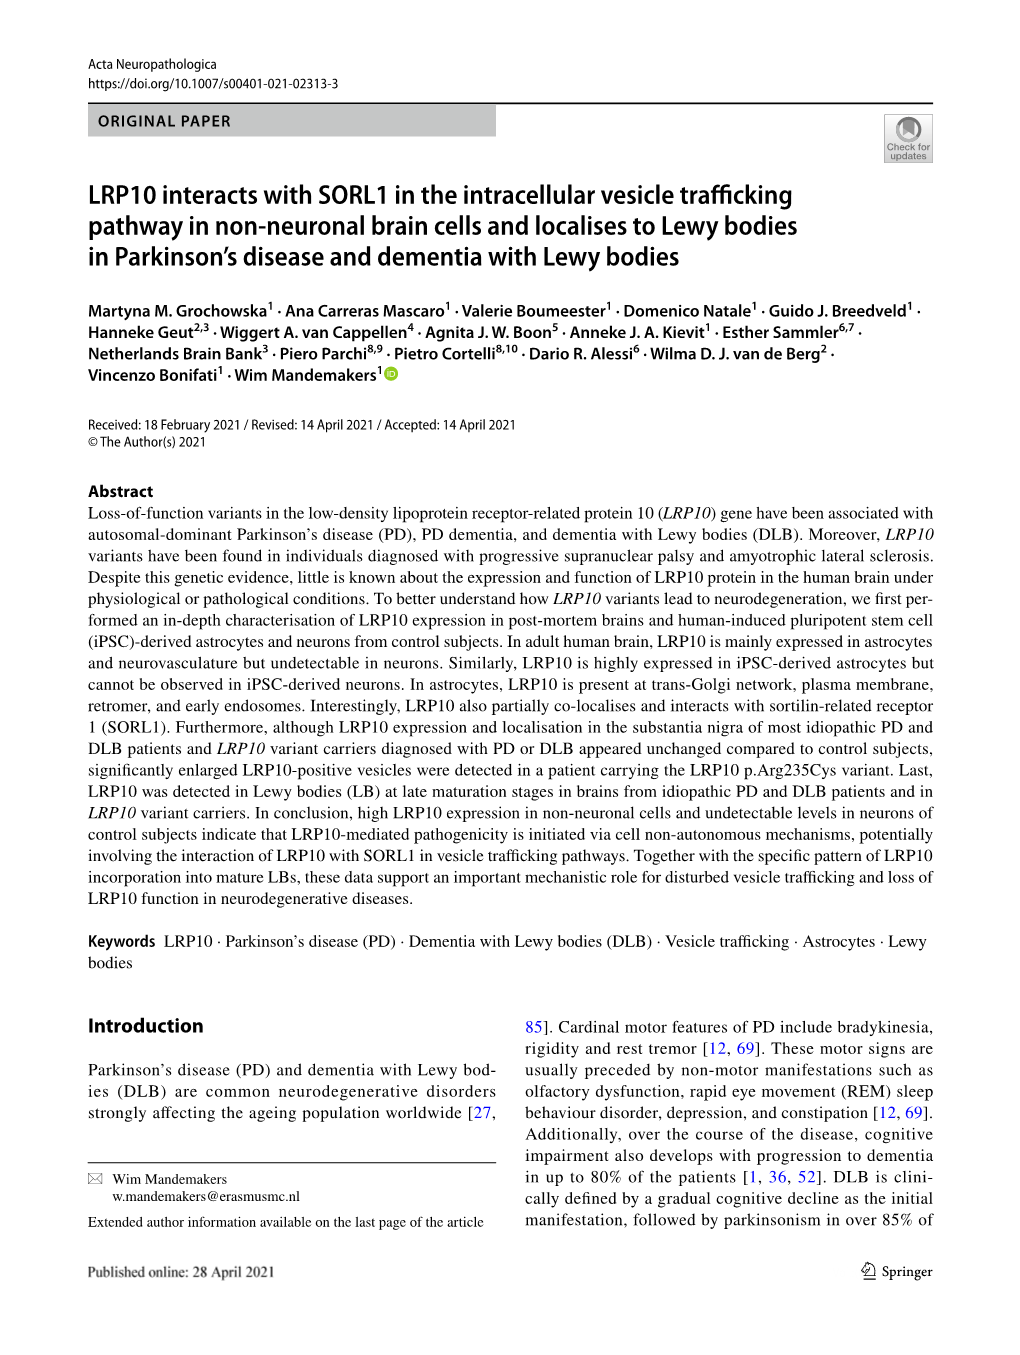 LRP10 Interacts with SORL1 in the Intracellular Vesicle Trafficking Pathway in Non-Neuronal Brain Cells and Localises to Lewy Bo